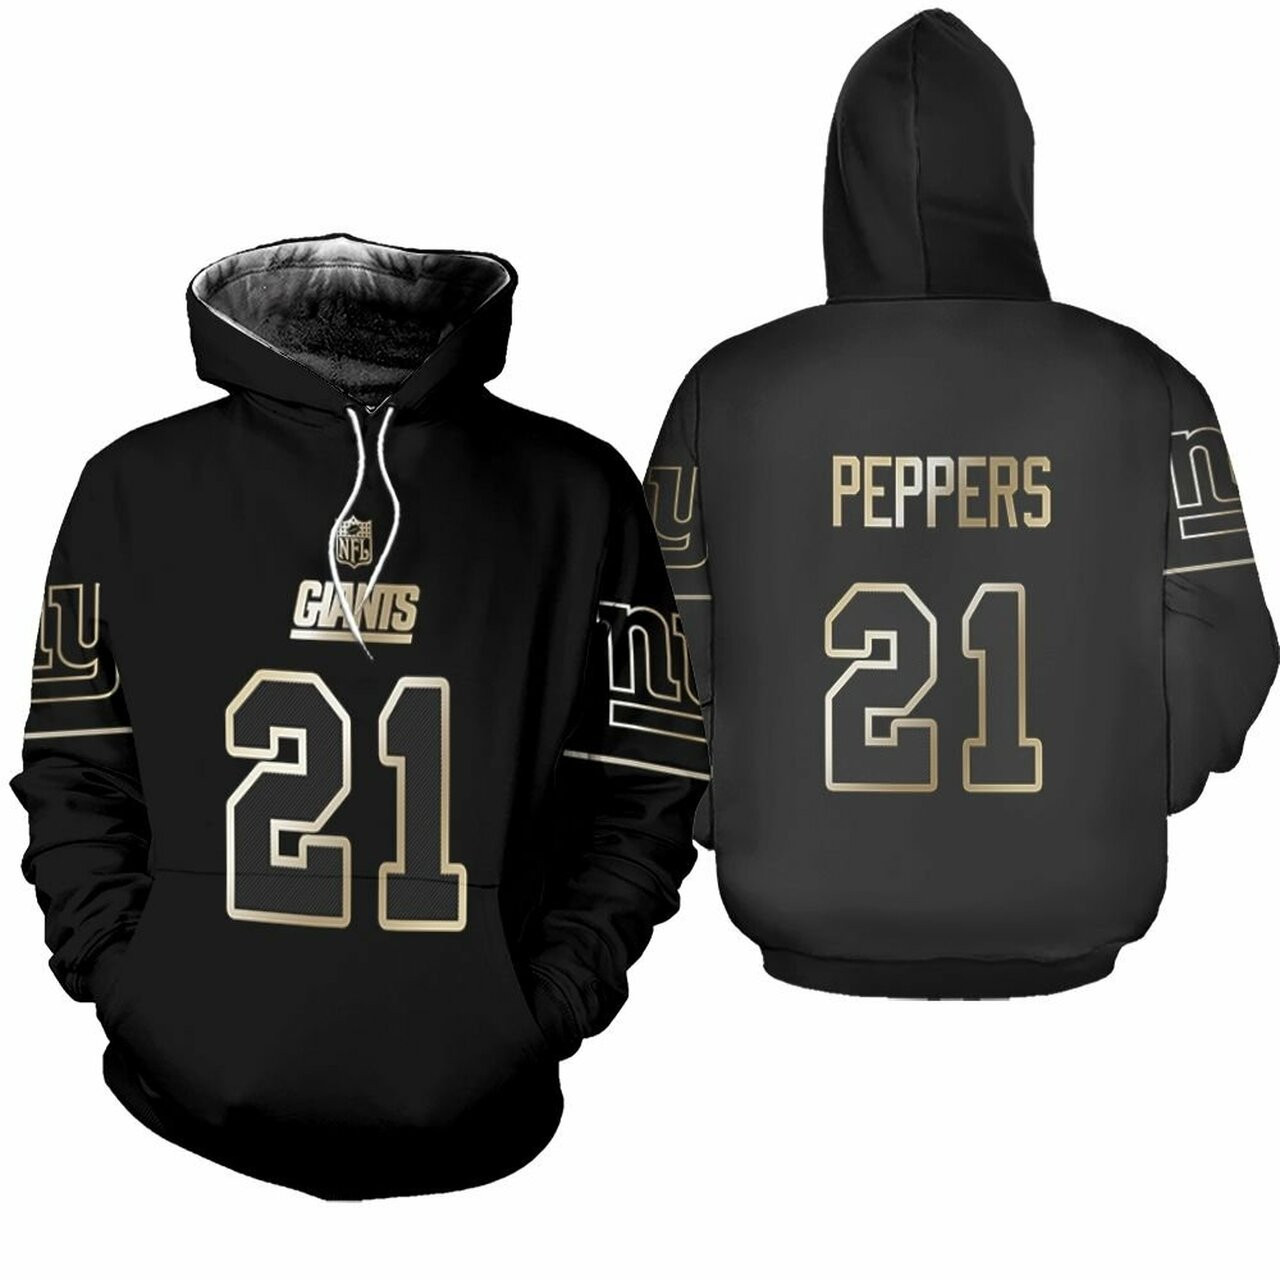 New York Giants Jabrill Peppers 21 Nfl Black Golden Edition 100 Year Anniversary Jersey Style Gift For Giants Fans Hoodie